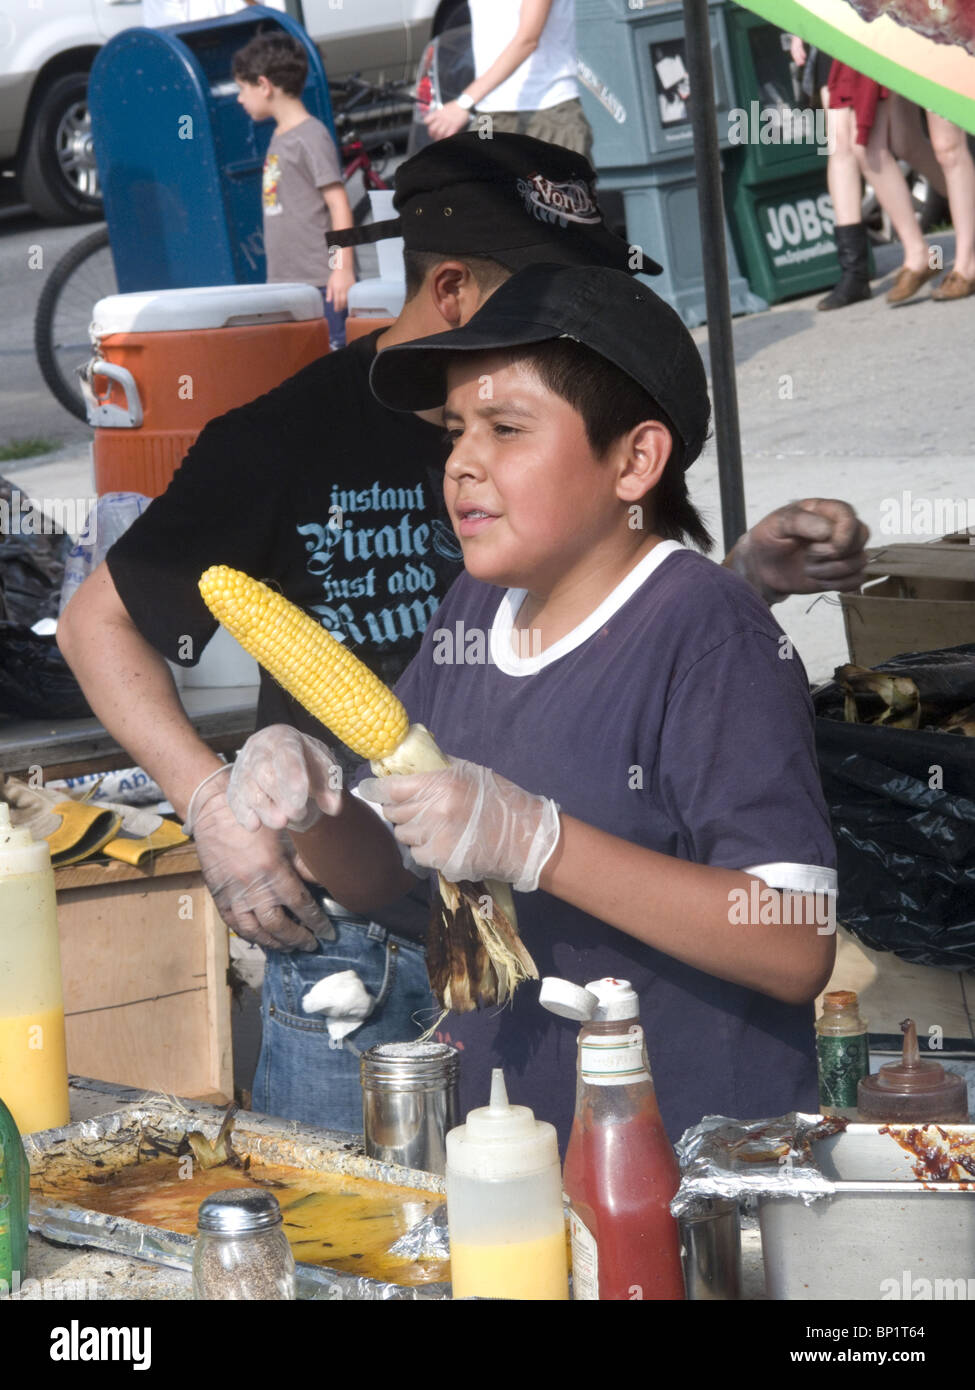 Young Mexican boy sells grilled corn at the 7th Heaven street fair in Park Slope, Brooklyn, NY. Stock Photo